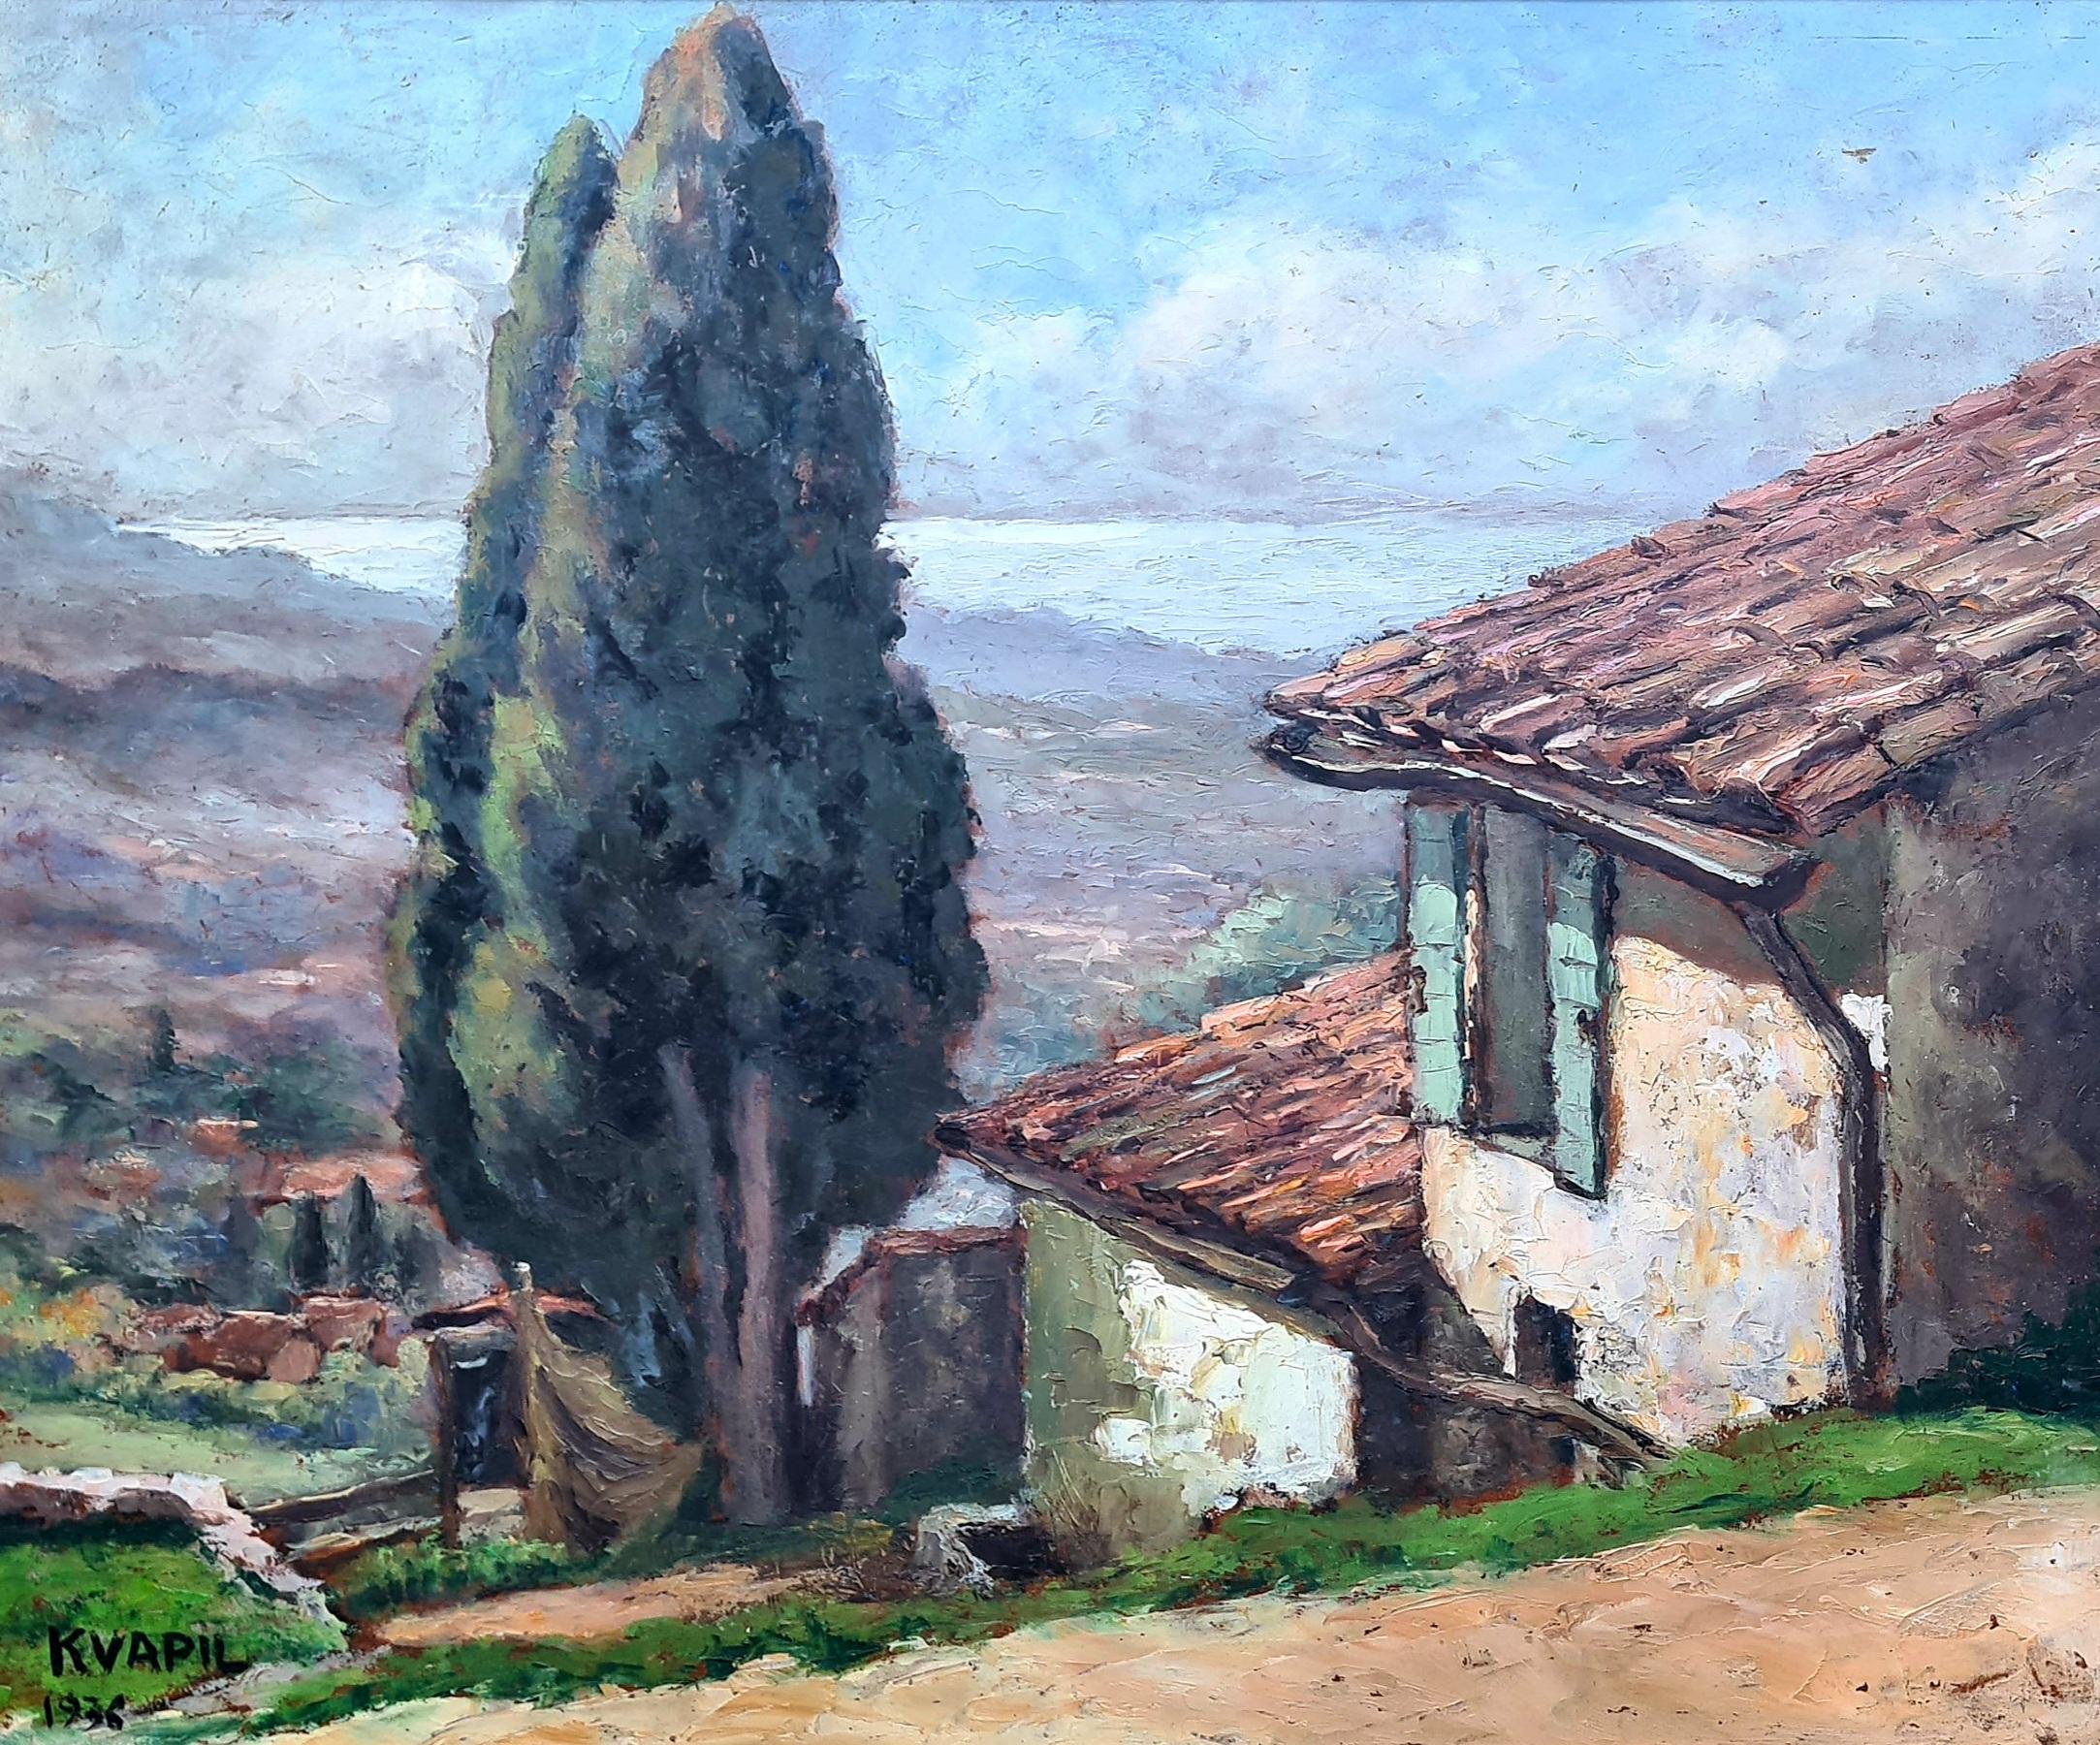 Post Impressionist View to the Sea, Corsica in a 'Cezanne' Landscape. - Painting by Charles Kvapil